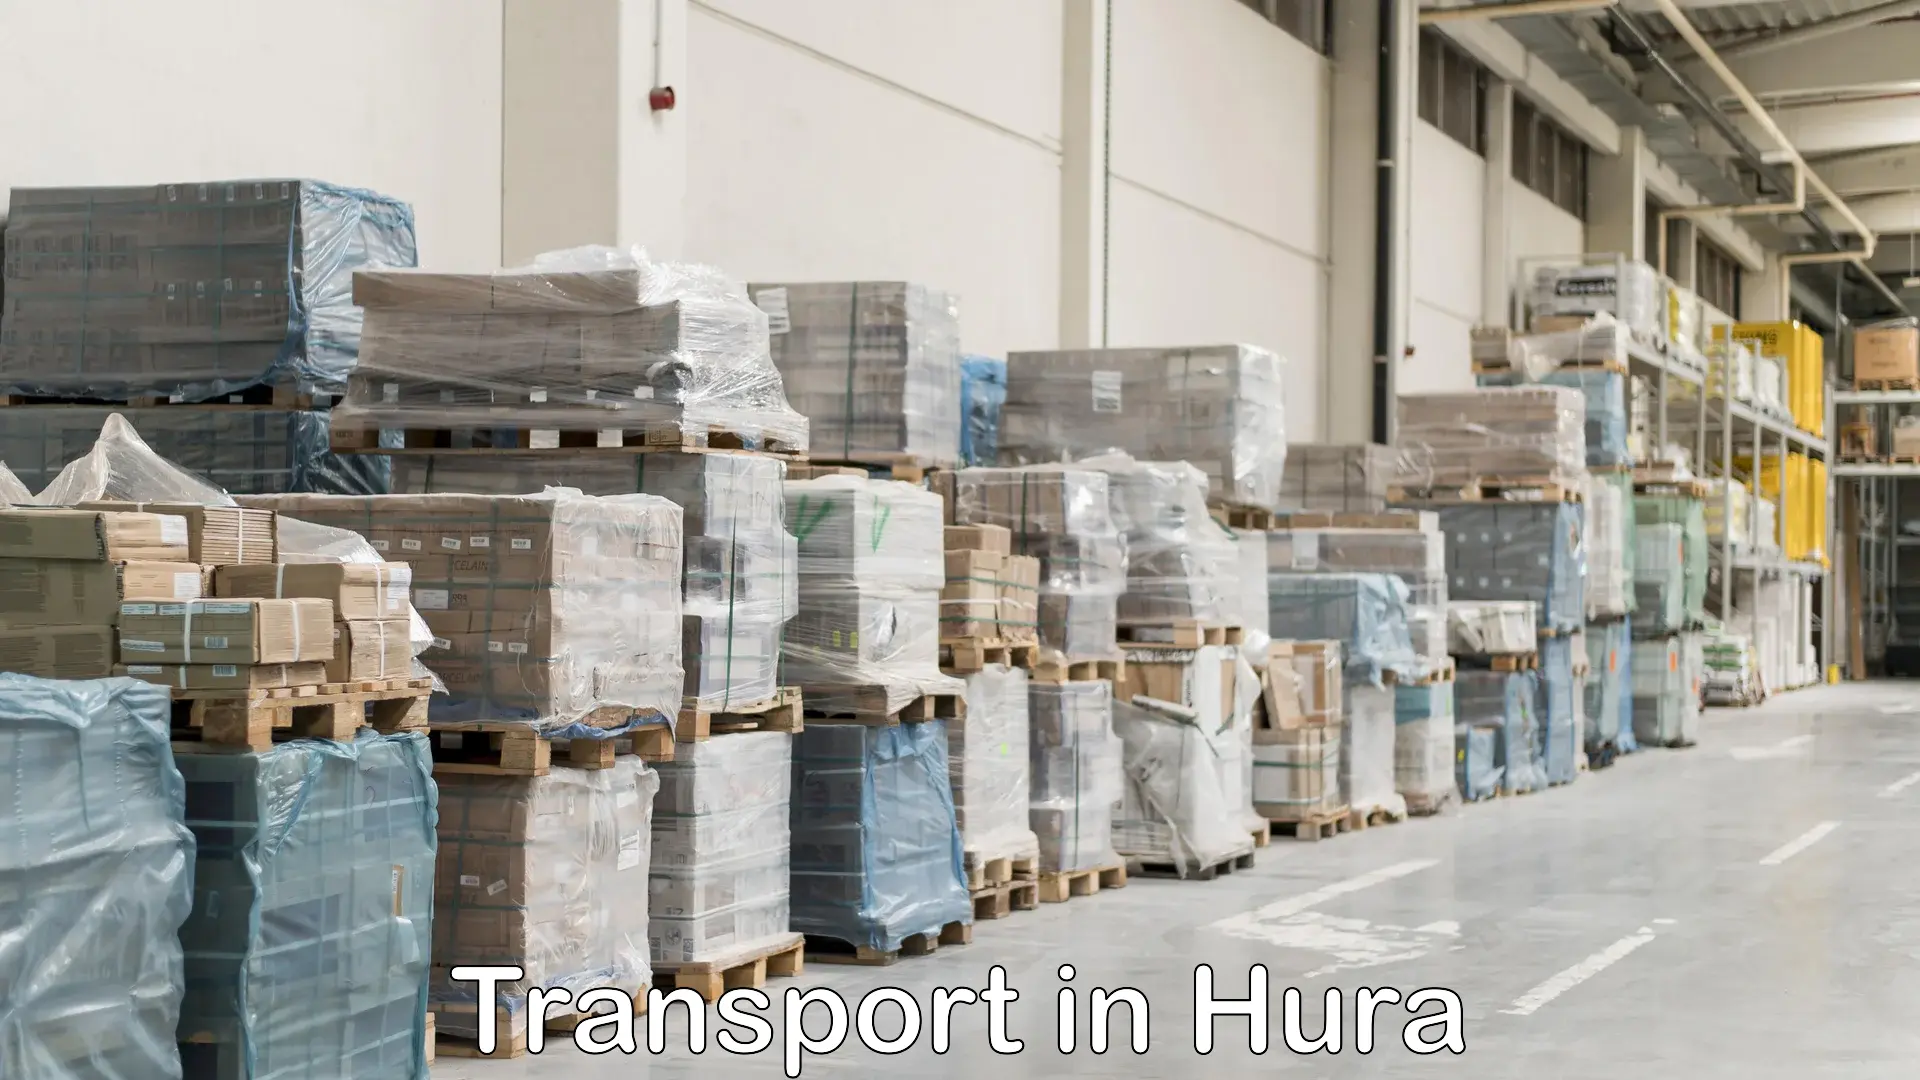 Daily transport service in Hura